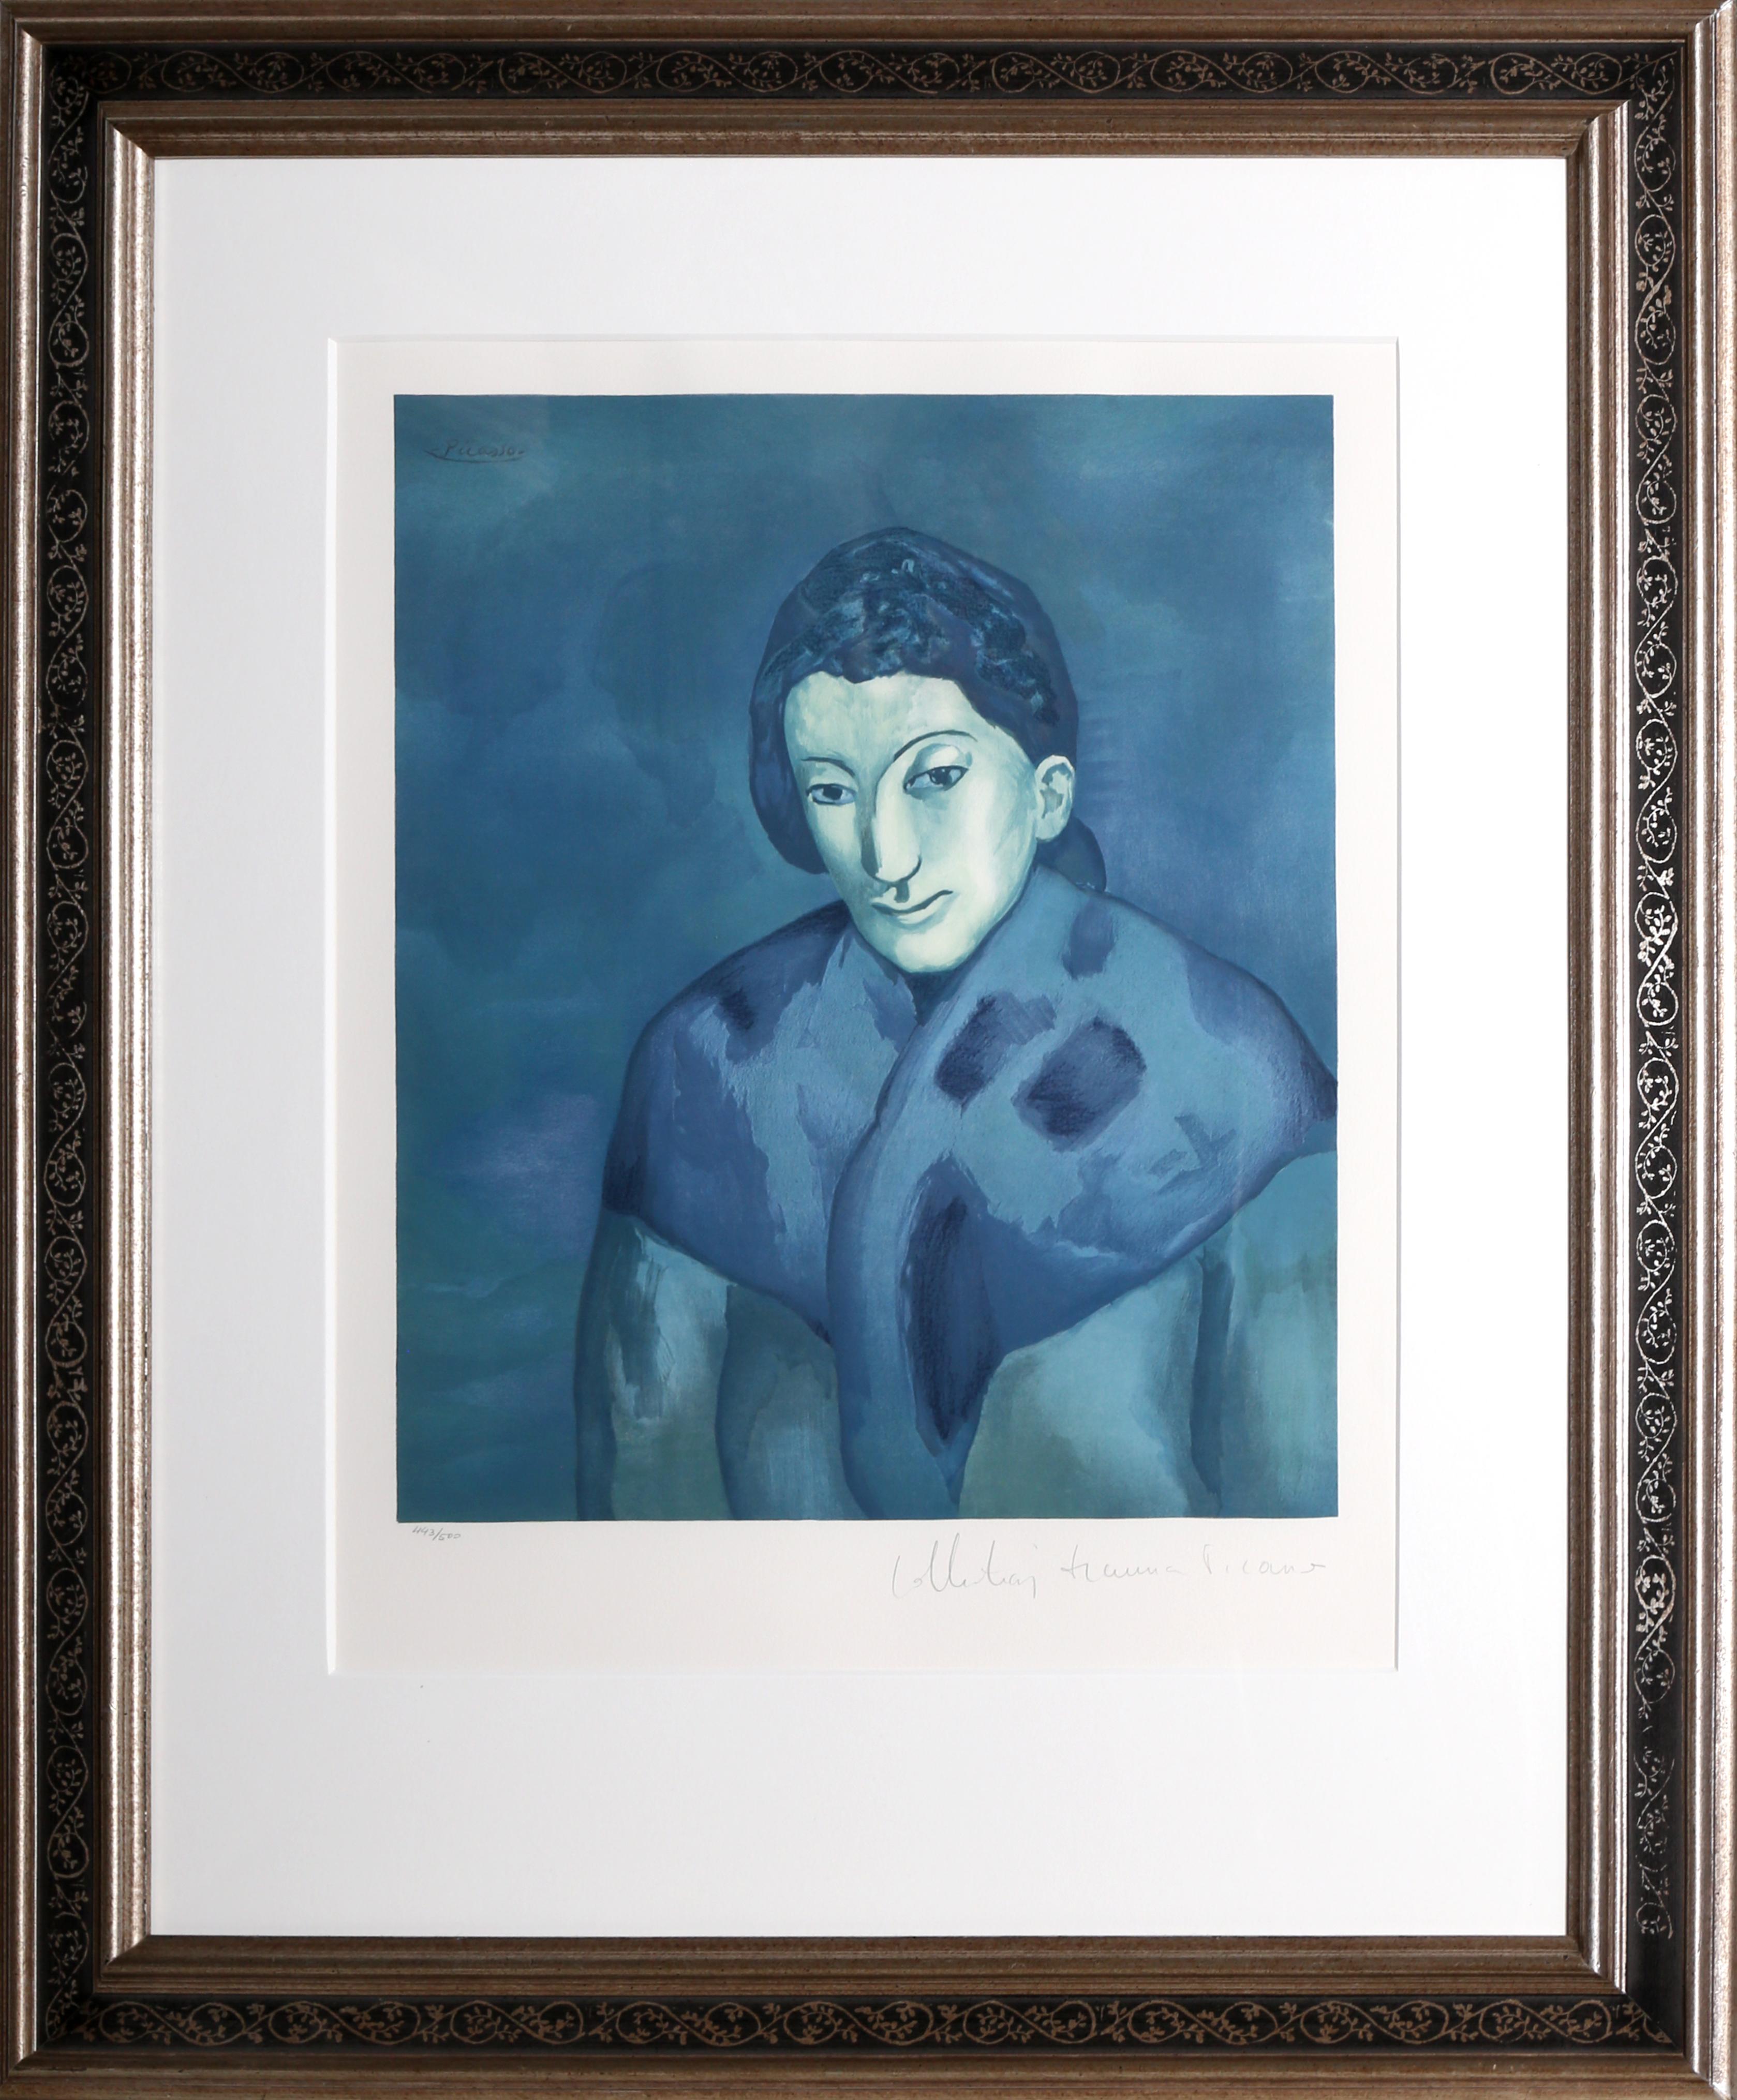 A lithograph from the Marina Picasso Estate Collection after the Pablo Picasso painting "Buste de Femme".  The original painting was completed in 1902. In the 1970's after Picasso's death, Marina Picasso, his granddaughter, authorized the creation